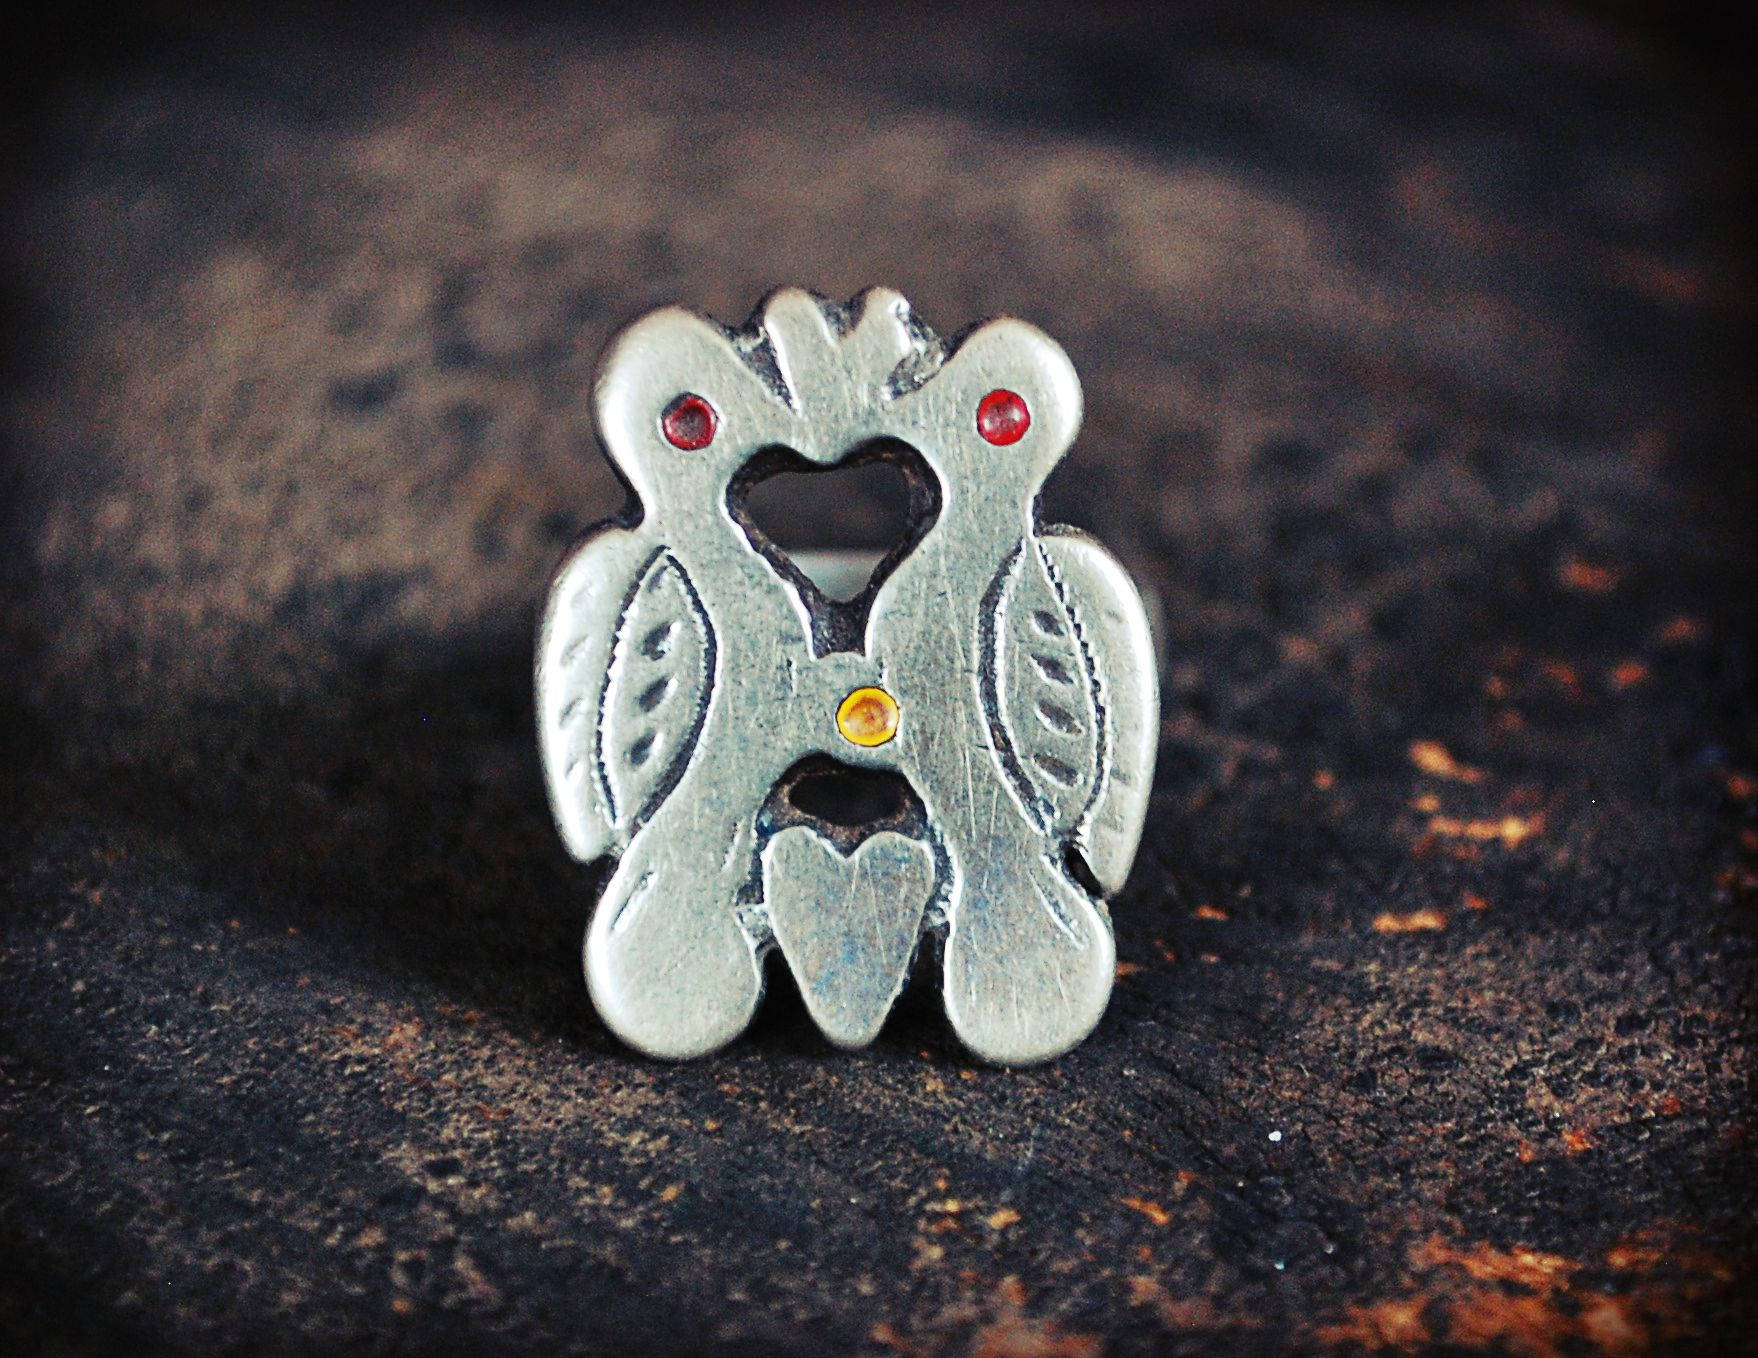 Antique Berber Love Birds Ring - Size 6.5 - Berber Jewelry - Tribal Silver Ring - Berber Ring - Moroccan Jewelry